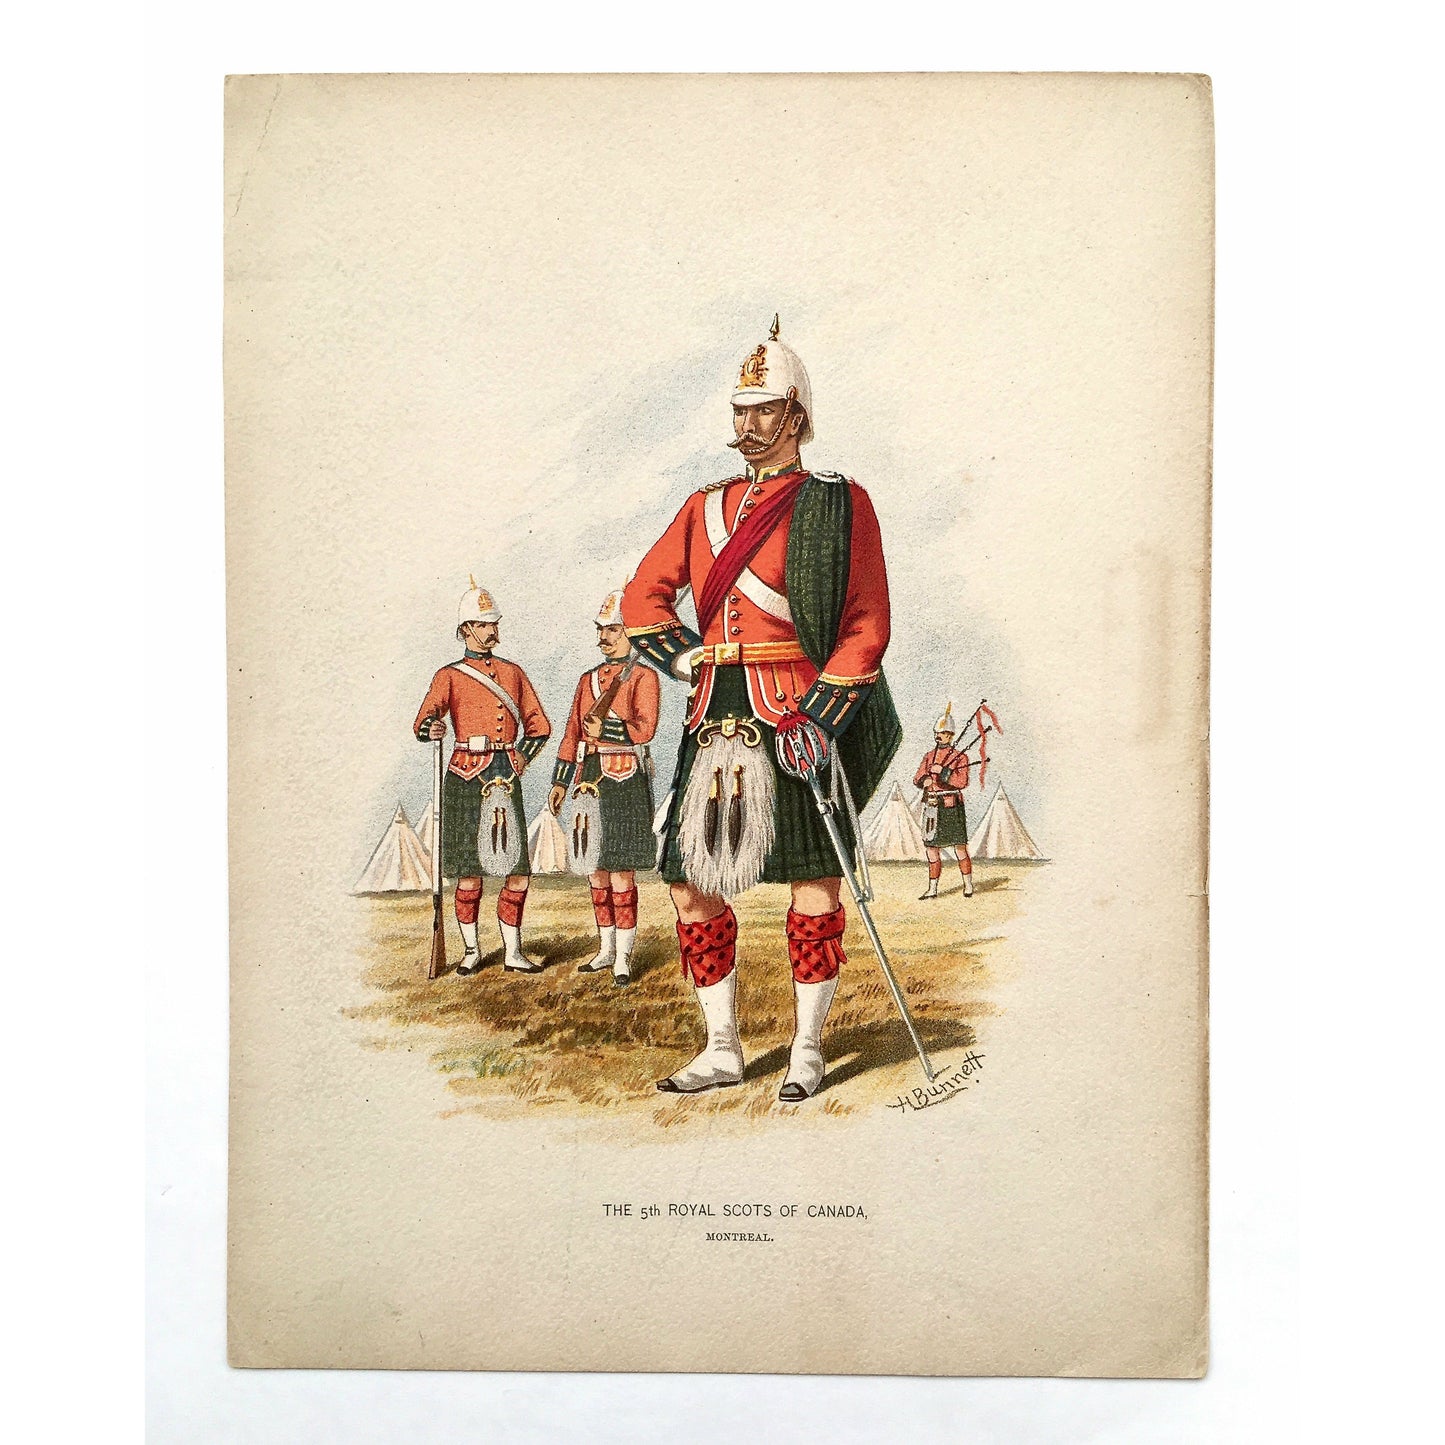 The 5th Royal Scots of Canada, Scots, Royal Scots, Scottish, Scotland, Kilts, bagpipes, Montreal, Canada, Artillery, Military, Military Costume, Horses, Riding, Costume, Uniform, Her Majesty's Army, Regiments, Queen's Forces, H. Bunnett, Bunnett, Sword, Army, London, 1890, Military Prints, Canadian, Canadian Military, Canadian Army, Armed Forces, Military Uniform, Chromolithograph, J. S. Virtue & Co., Antique, Prints, Antique Prints, Interior Decor, Interior Design, Design, Military History, Art History, 